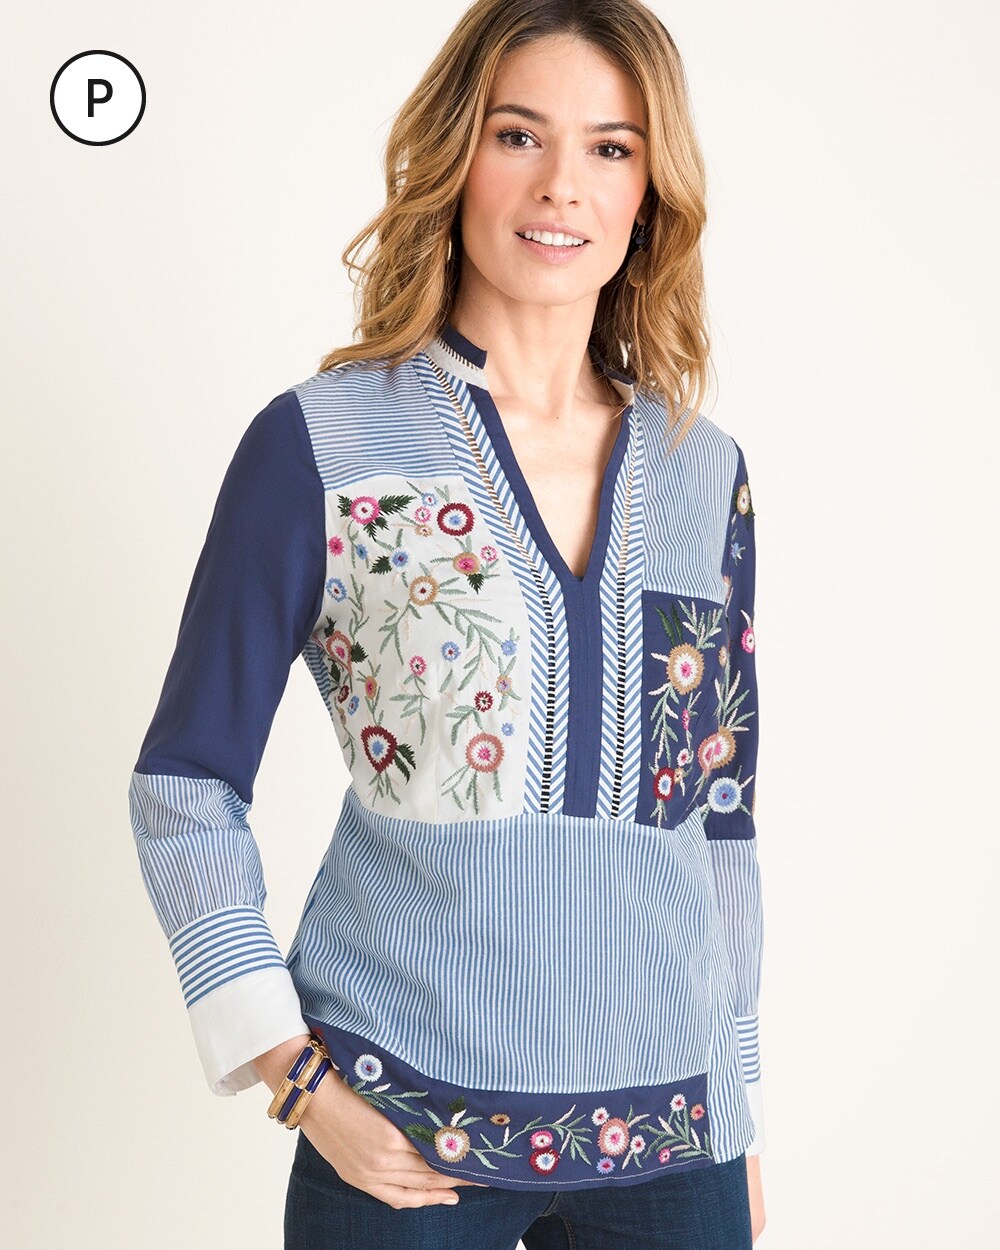 Petite Patchwork Embroidery Top